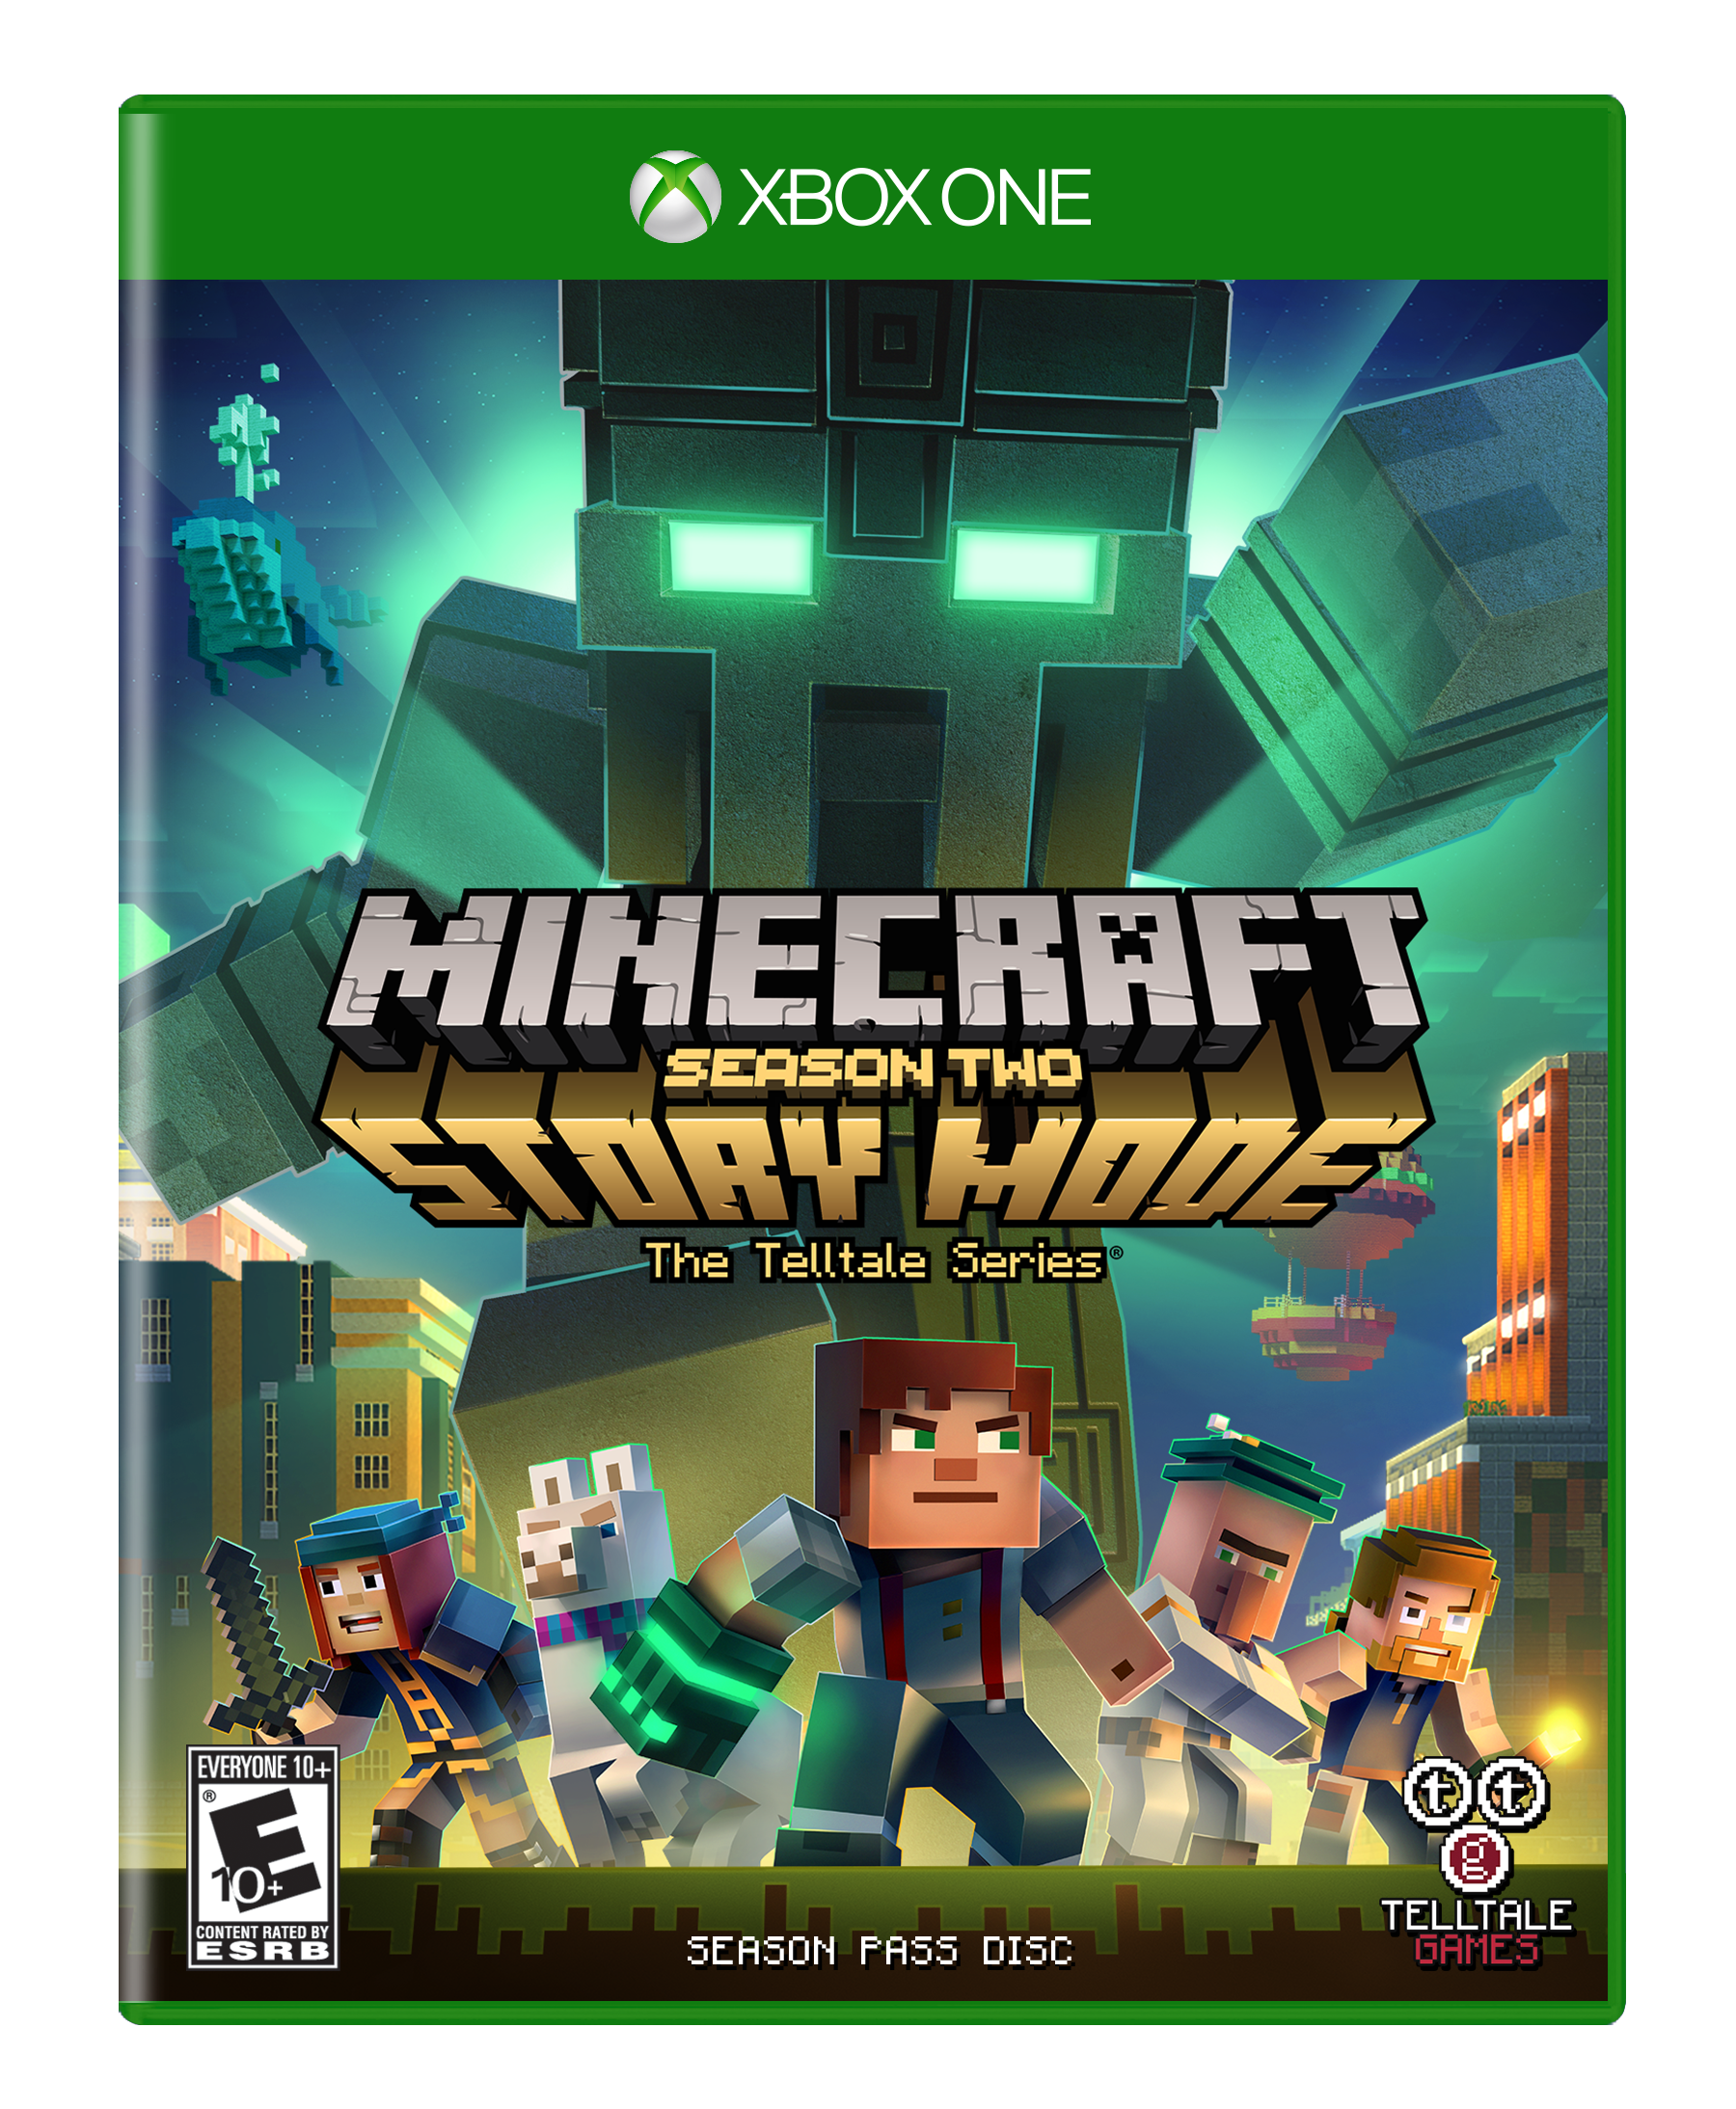 Minecraft: Story Mode Season 2, Episode 1 Review